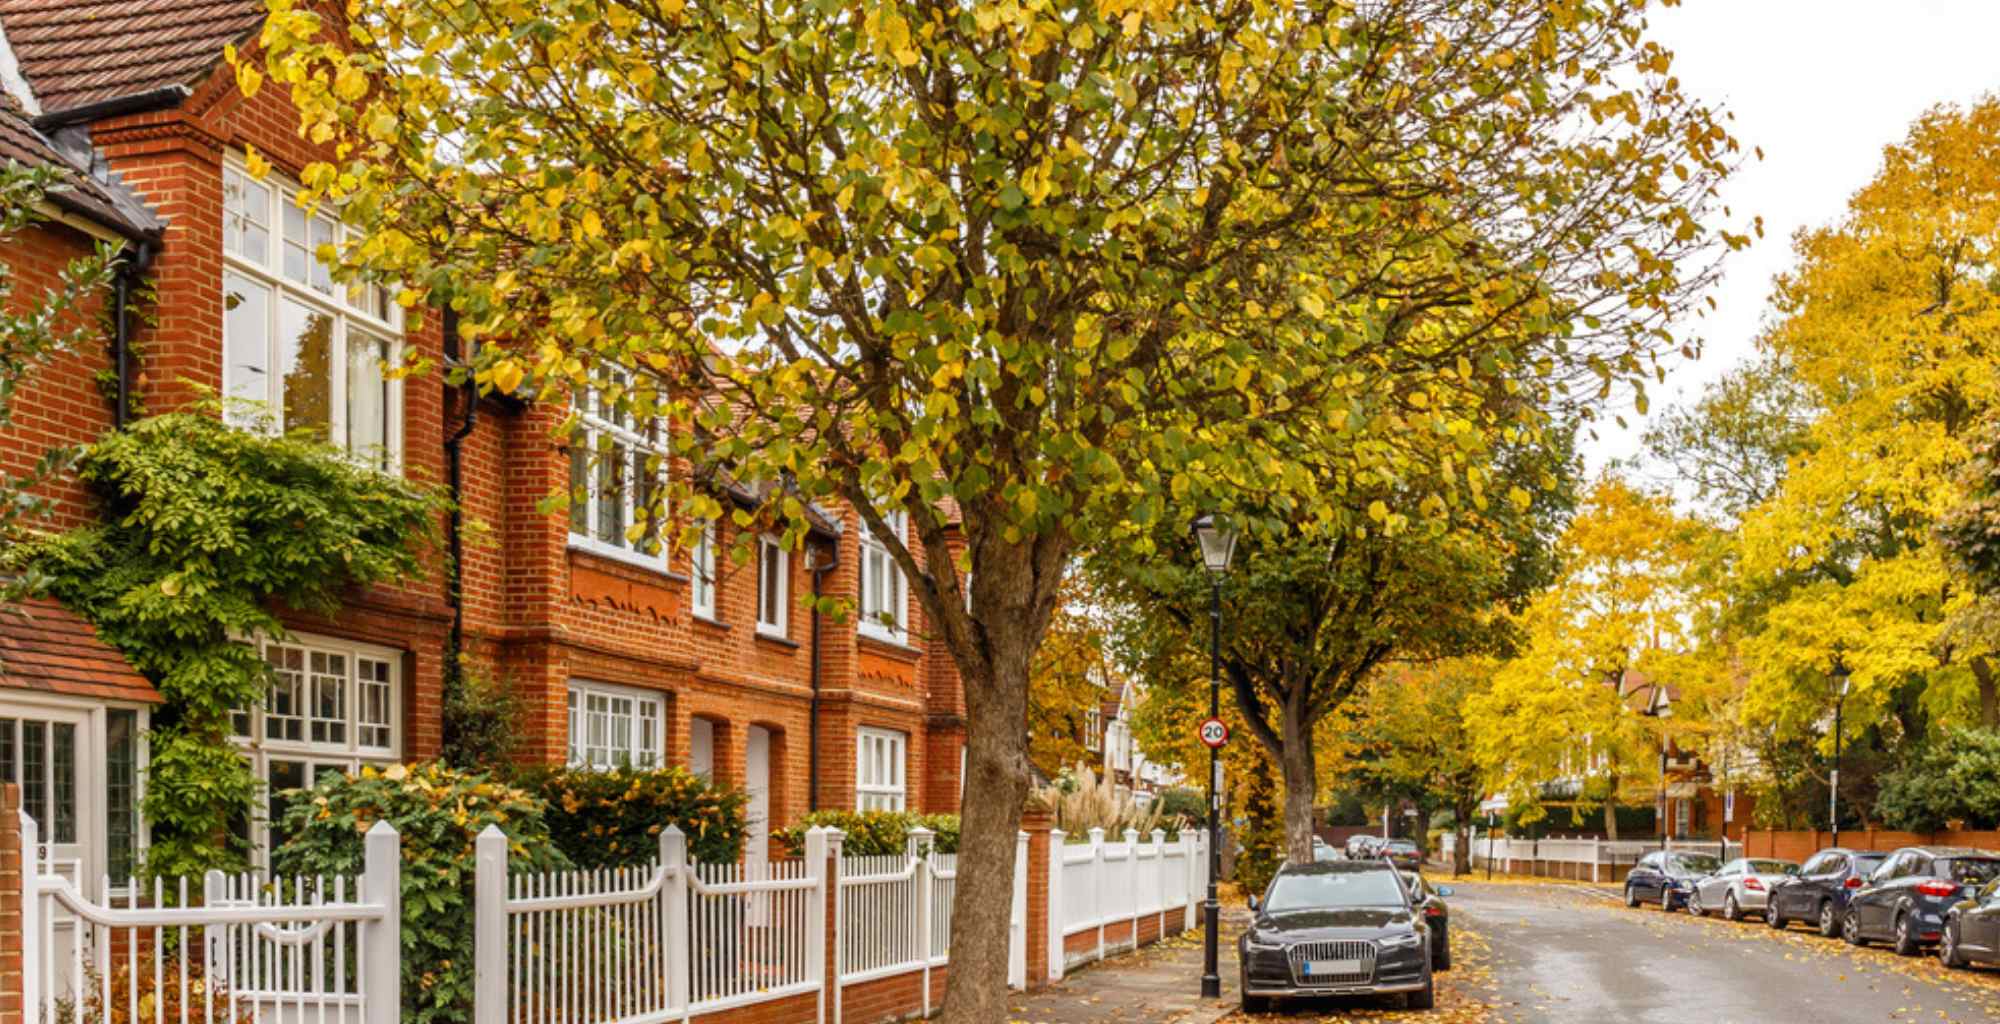 Selling property in Autumn